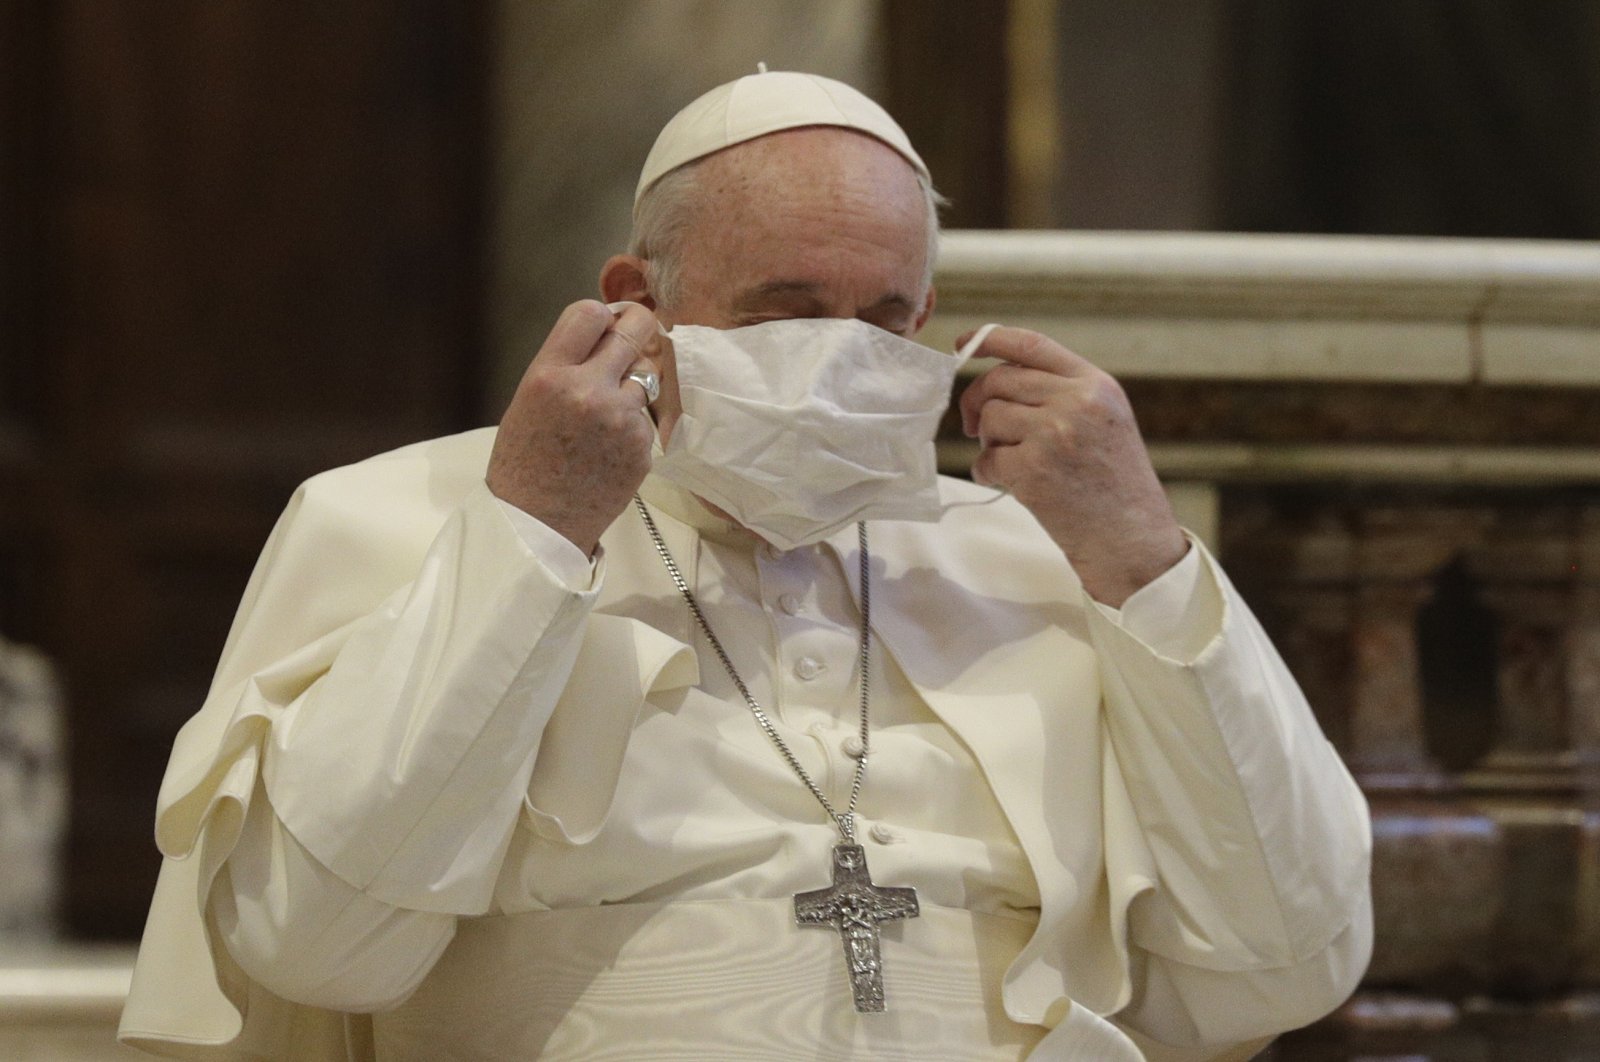 Pope Francis puts on his face mask as he attends an inter-religious ceremony for peace in the Basilica of Santa Maria, Aracoeli, Rome, Oct. 20, 2020. (AP Photo)